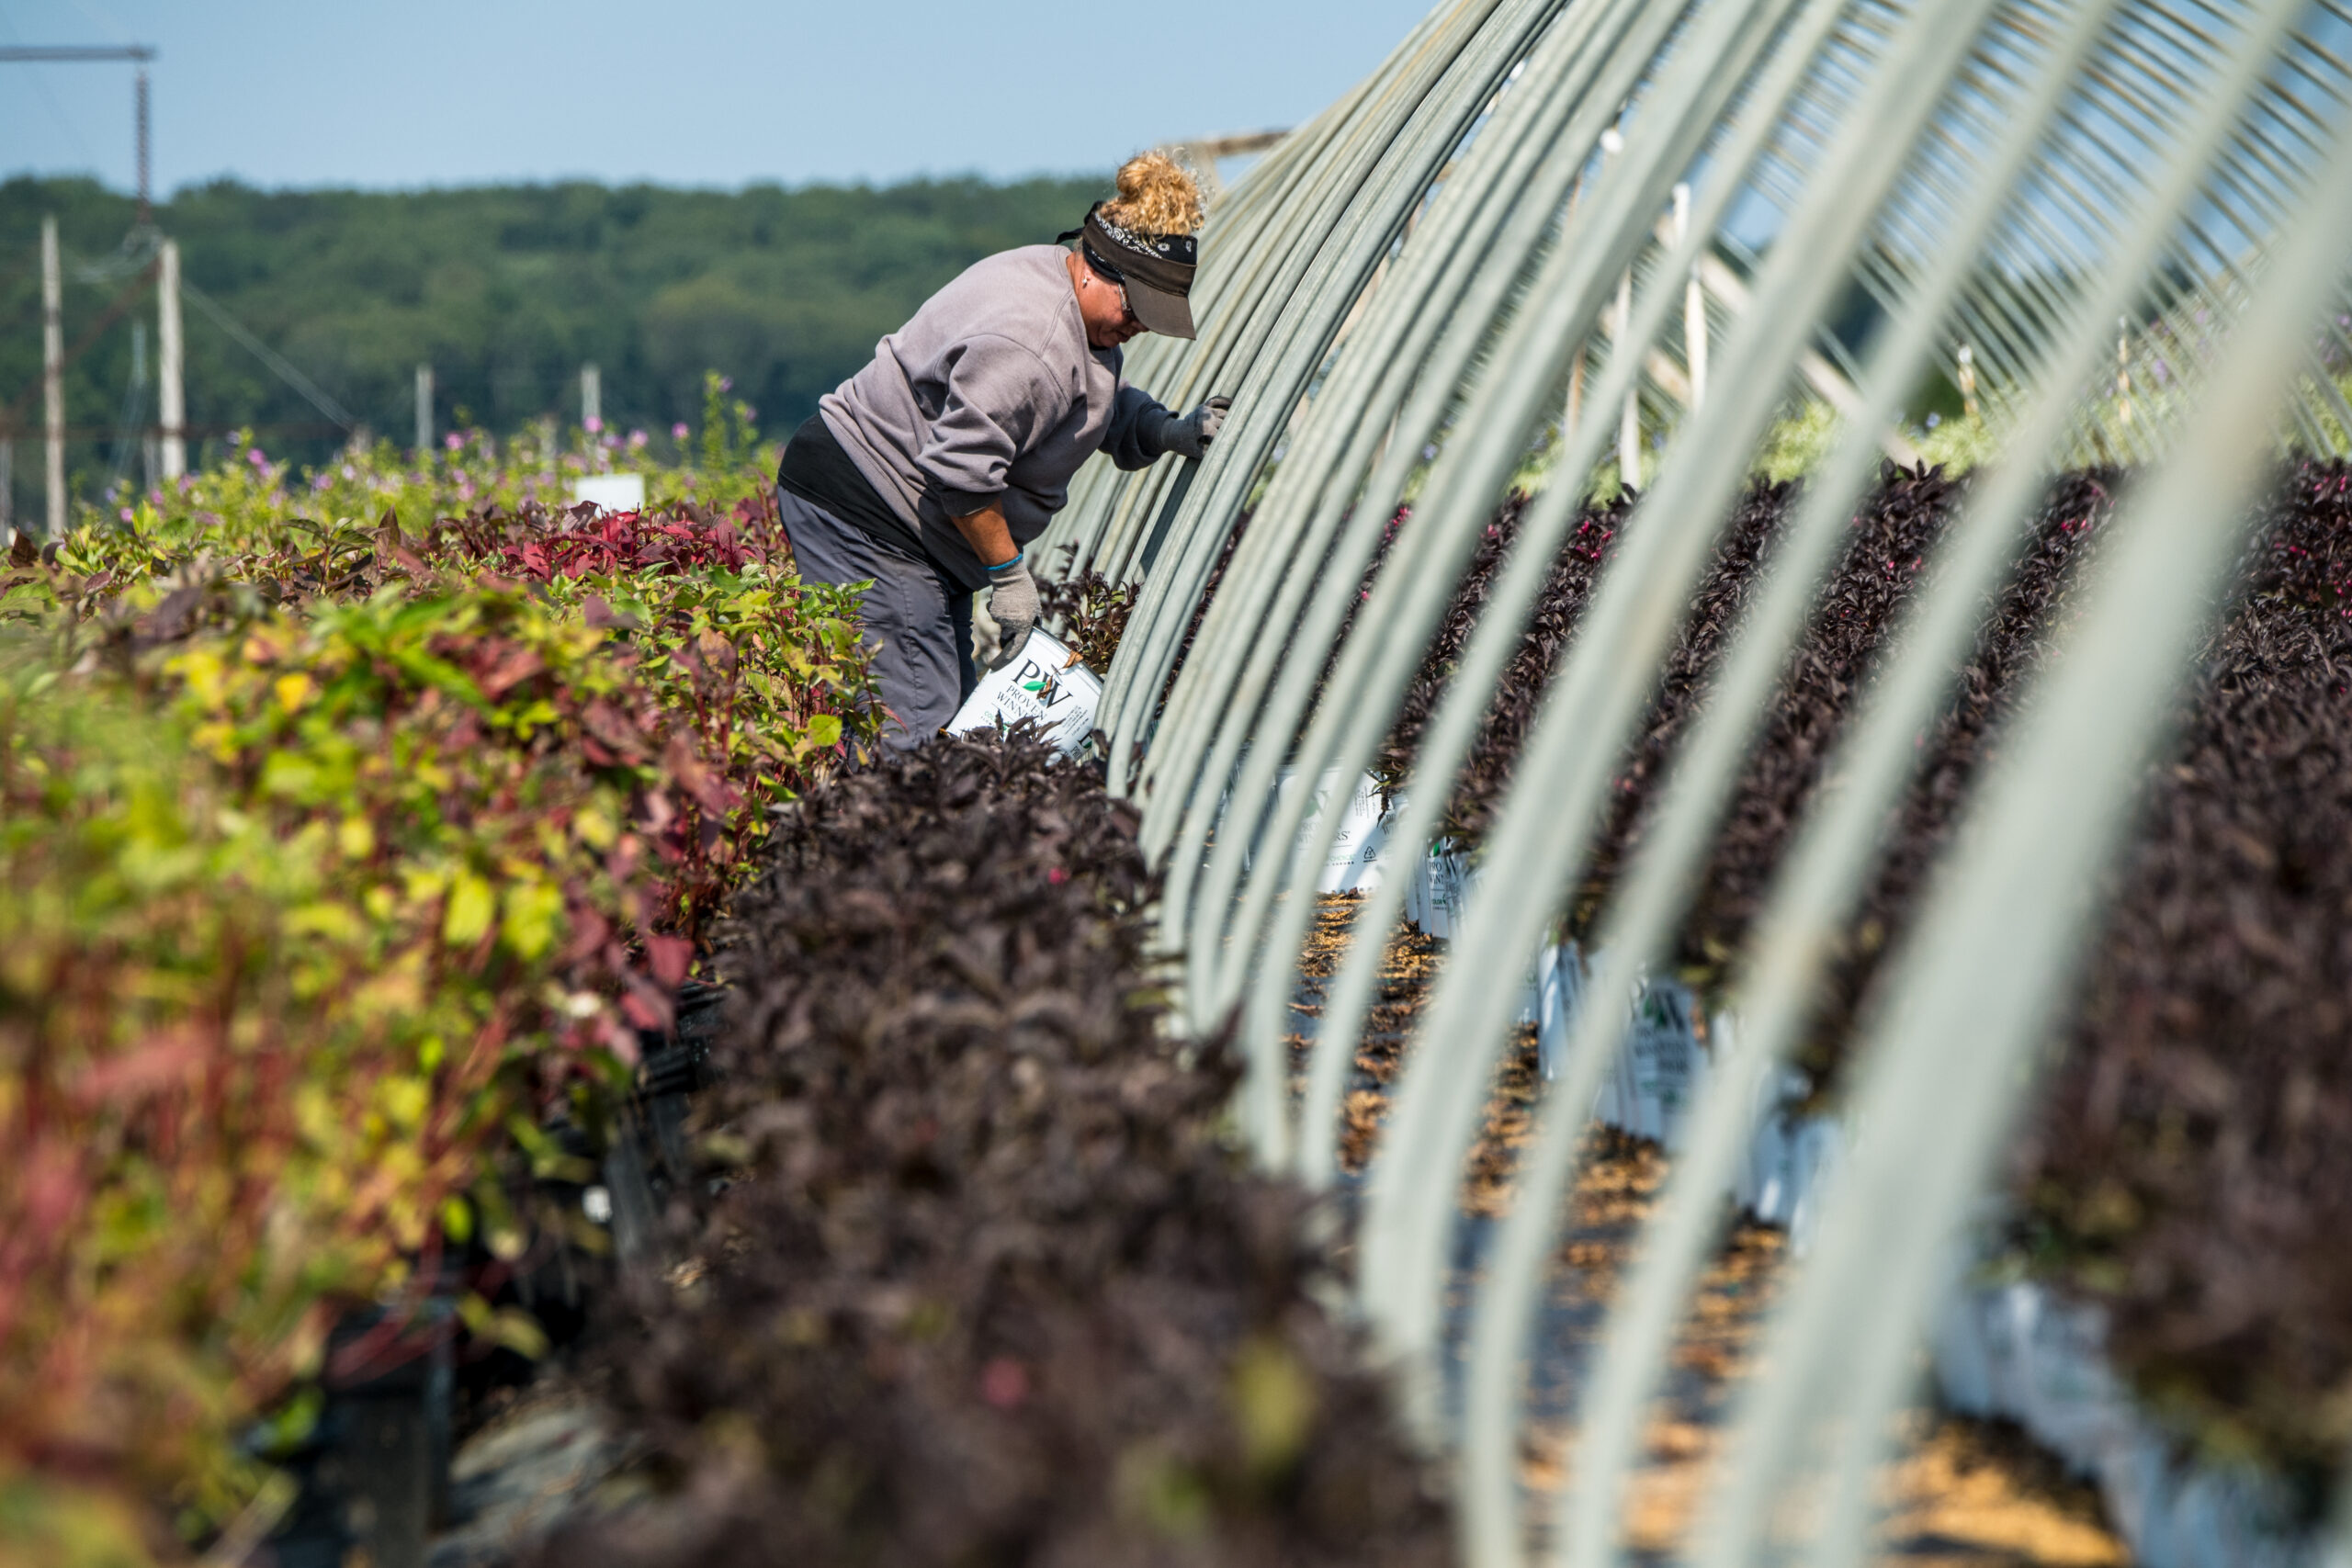 Farmworker places potted shrubs in an uncovered hoop house.